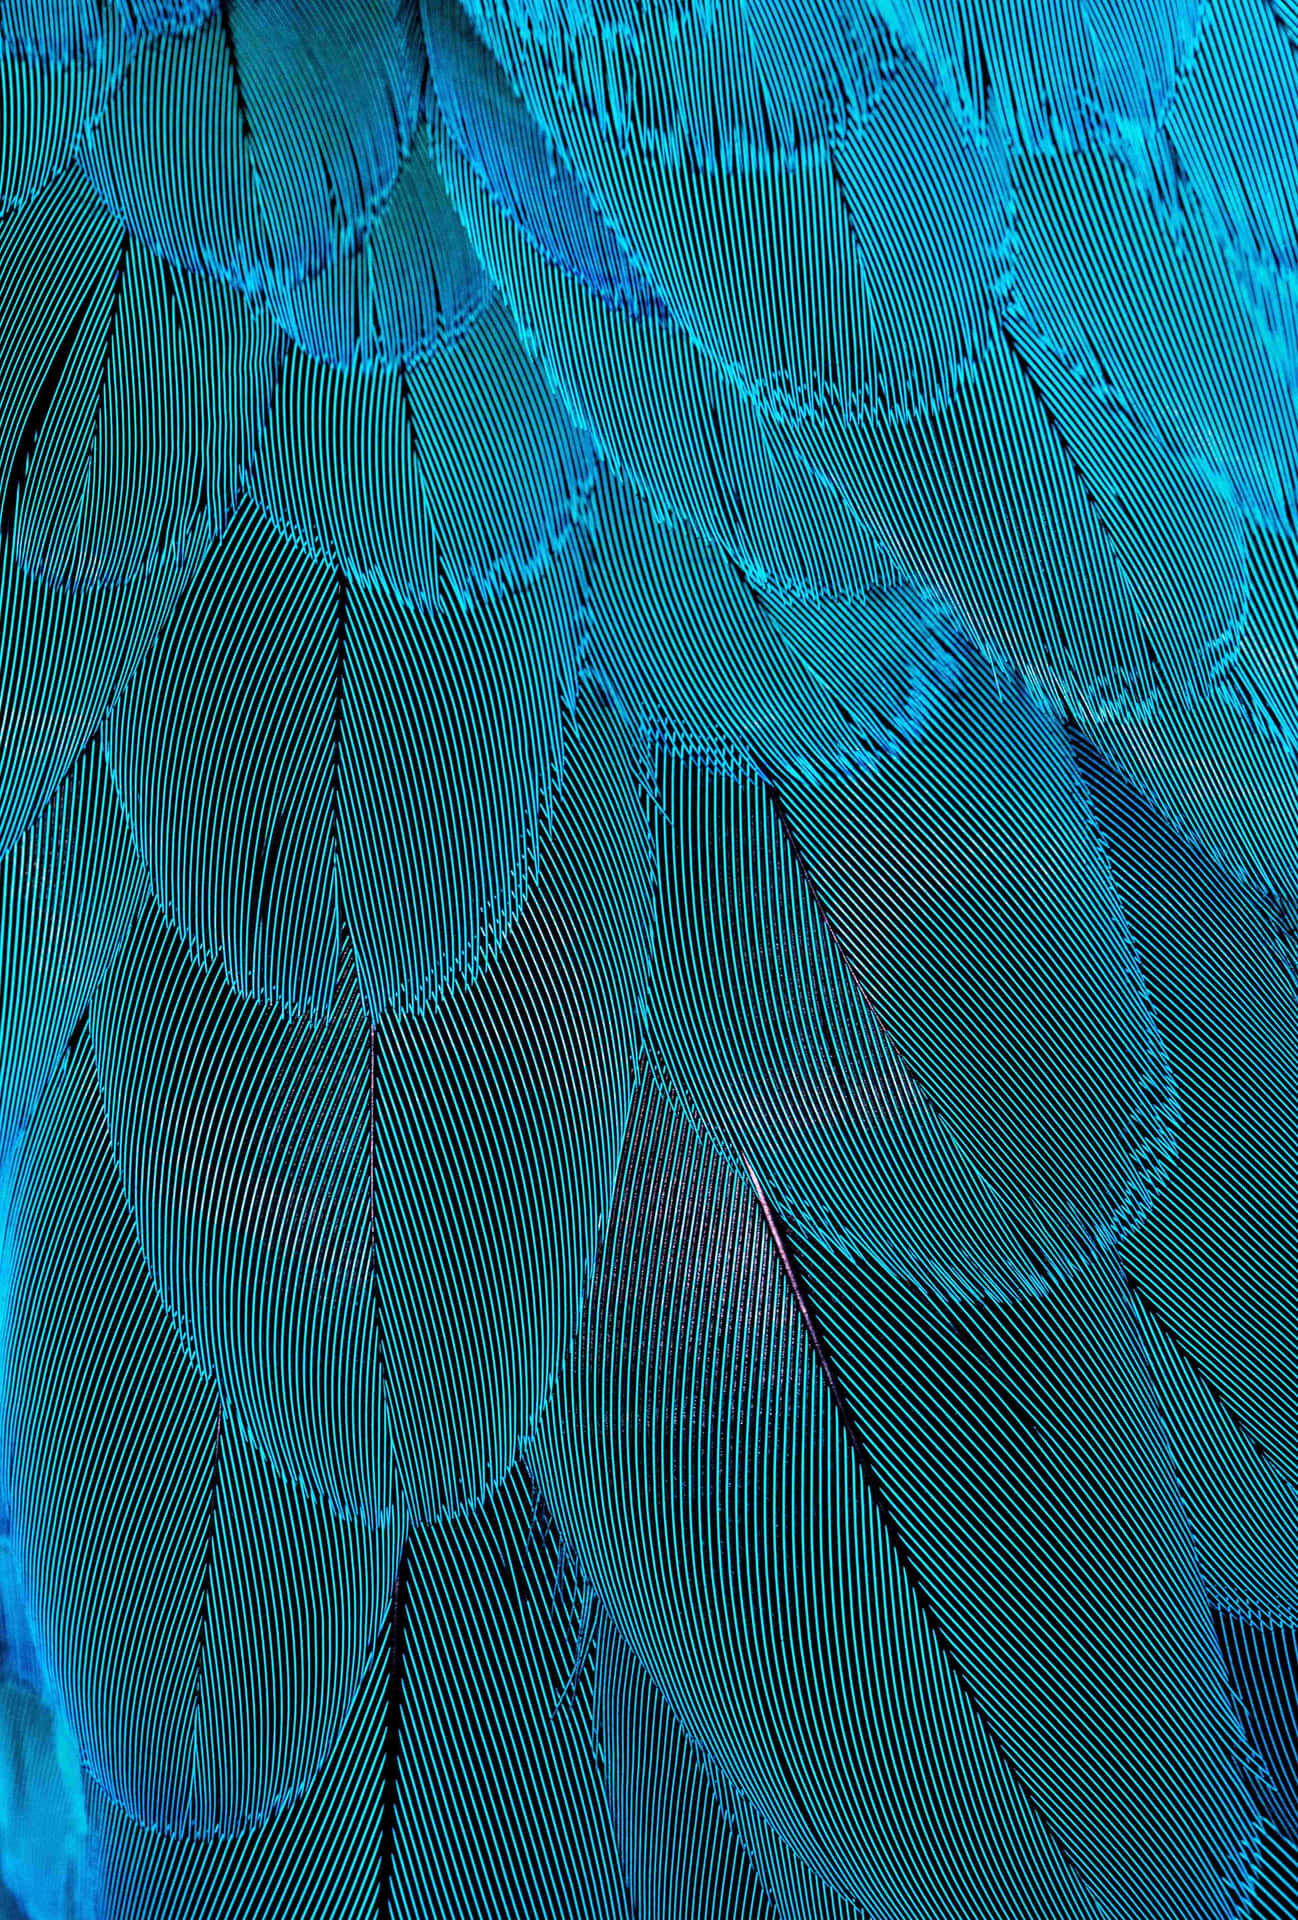 Shimmering Blue Feathers Picsart Background